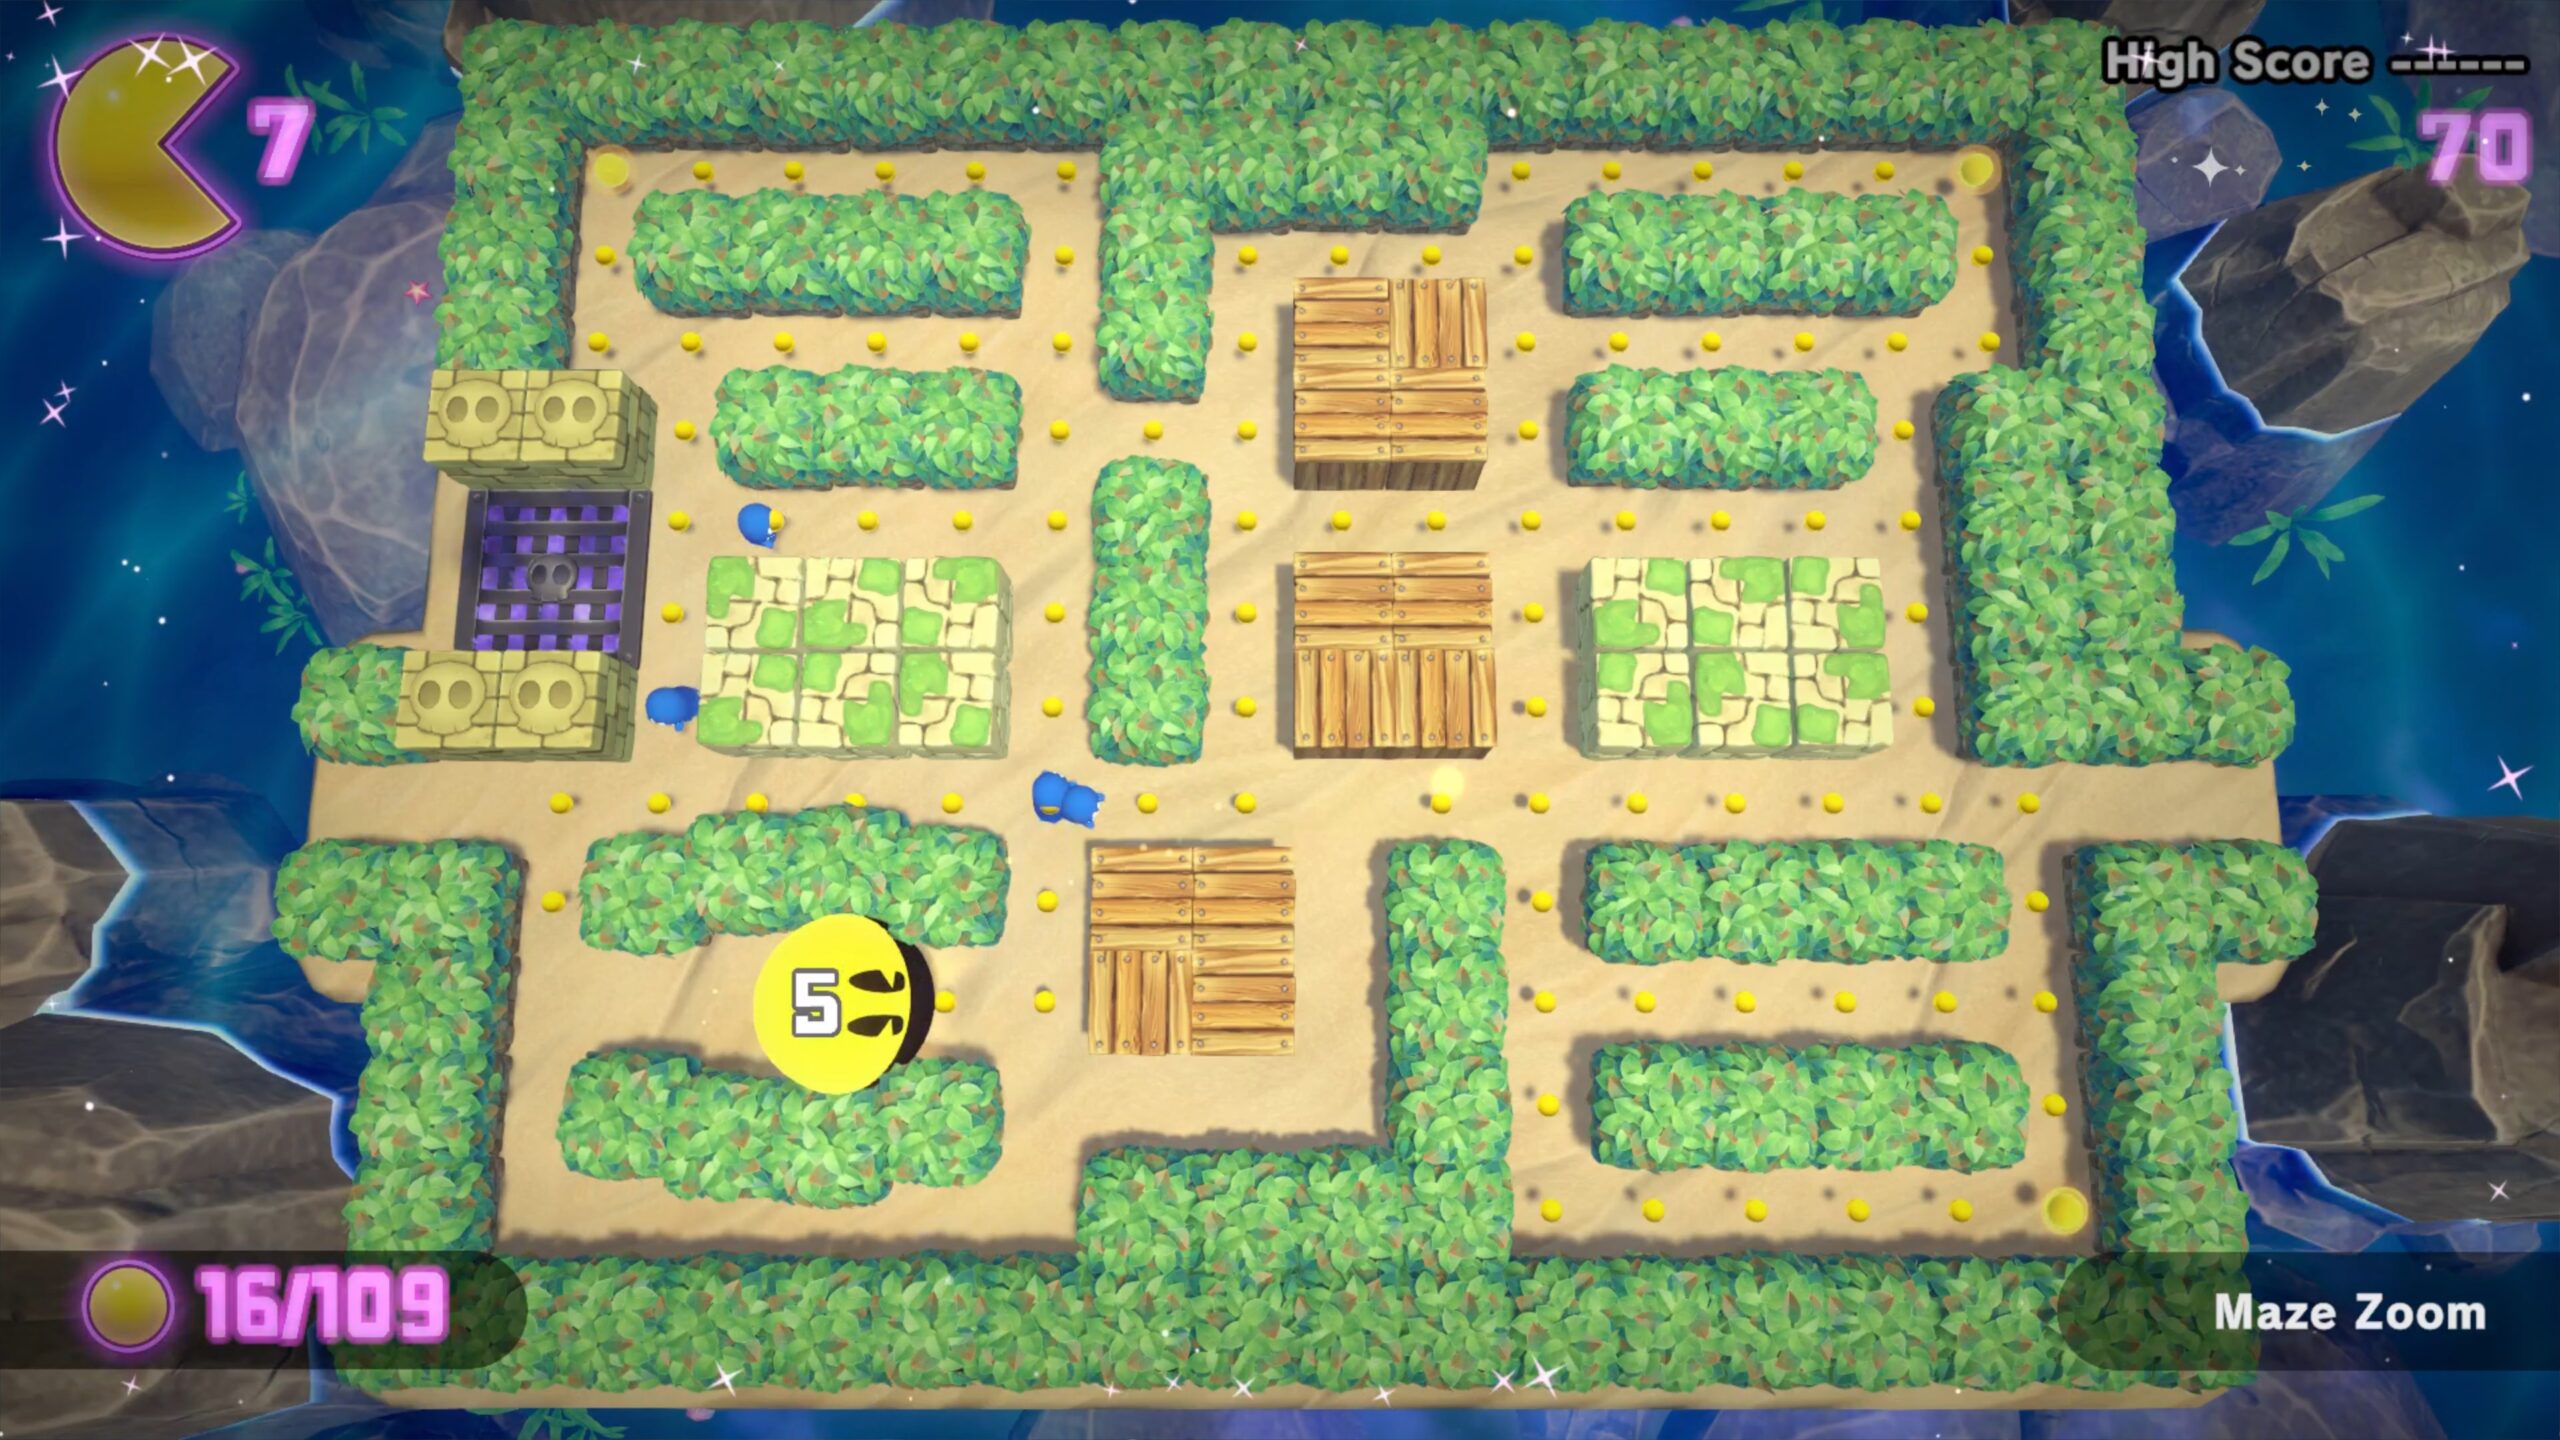 Google Maps Is Now A Giant Game Of Secret Pac-Man